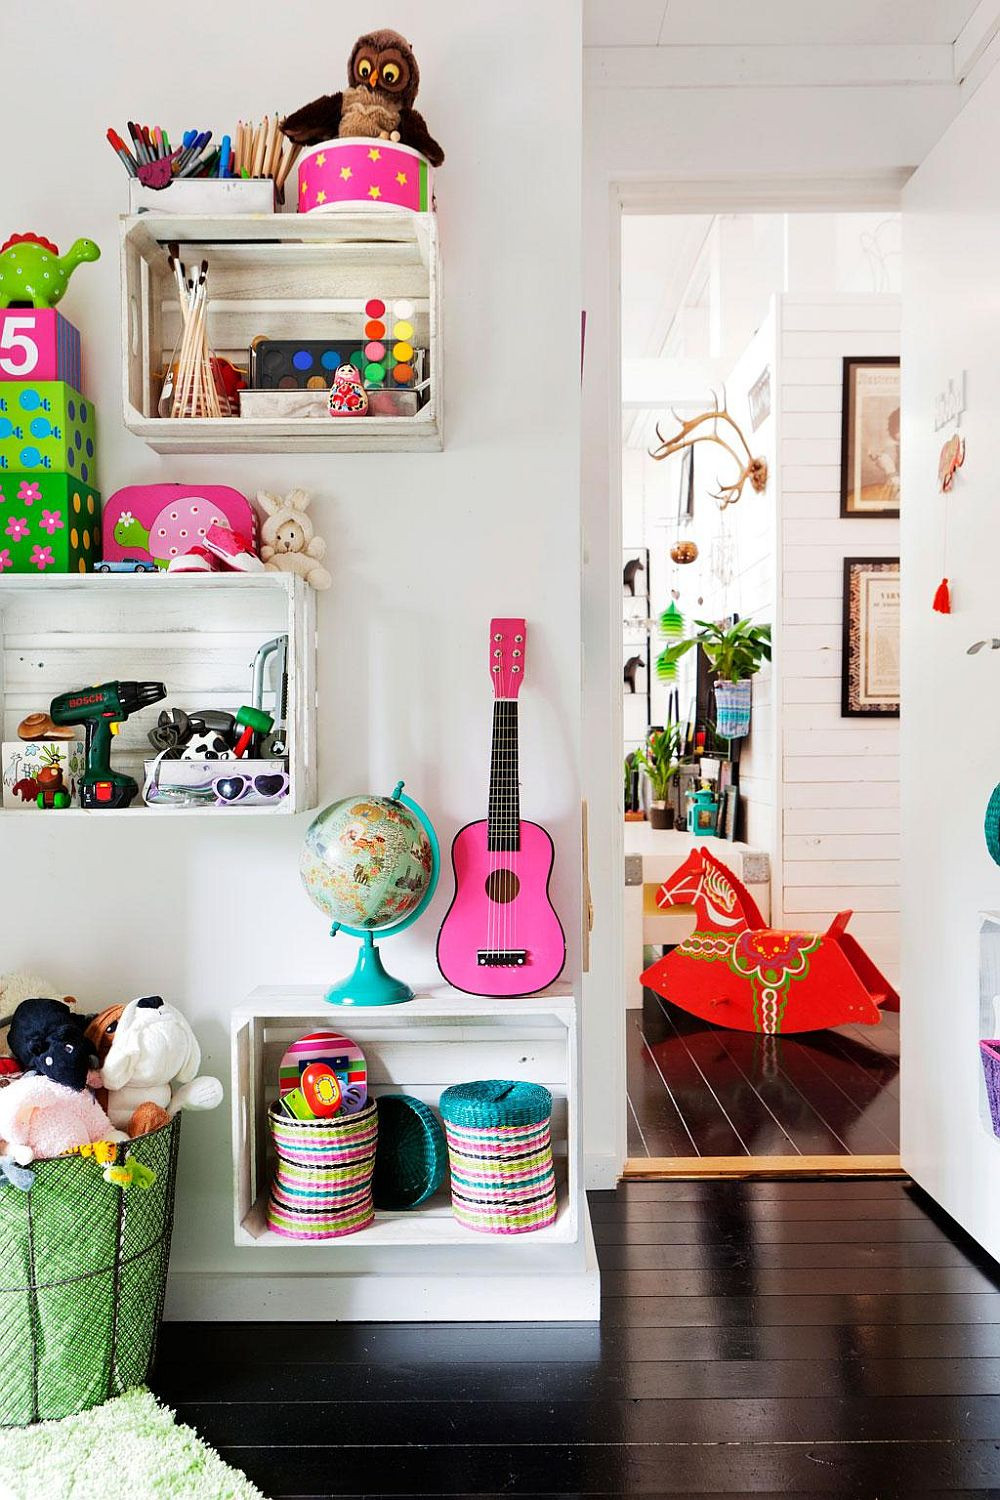 DIY Projects For Kids Room
 11 Space Saving DIY Kids’ Room Storage Ideas that Help